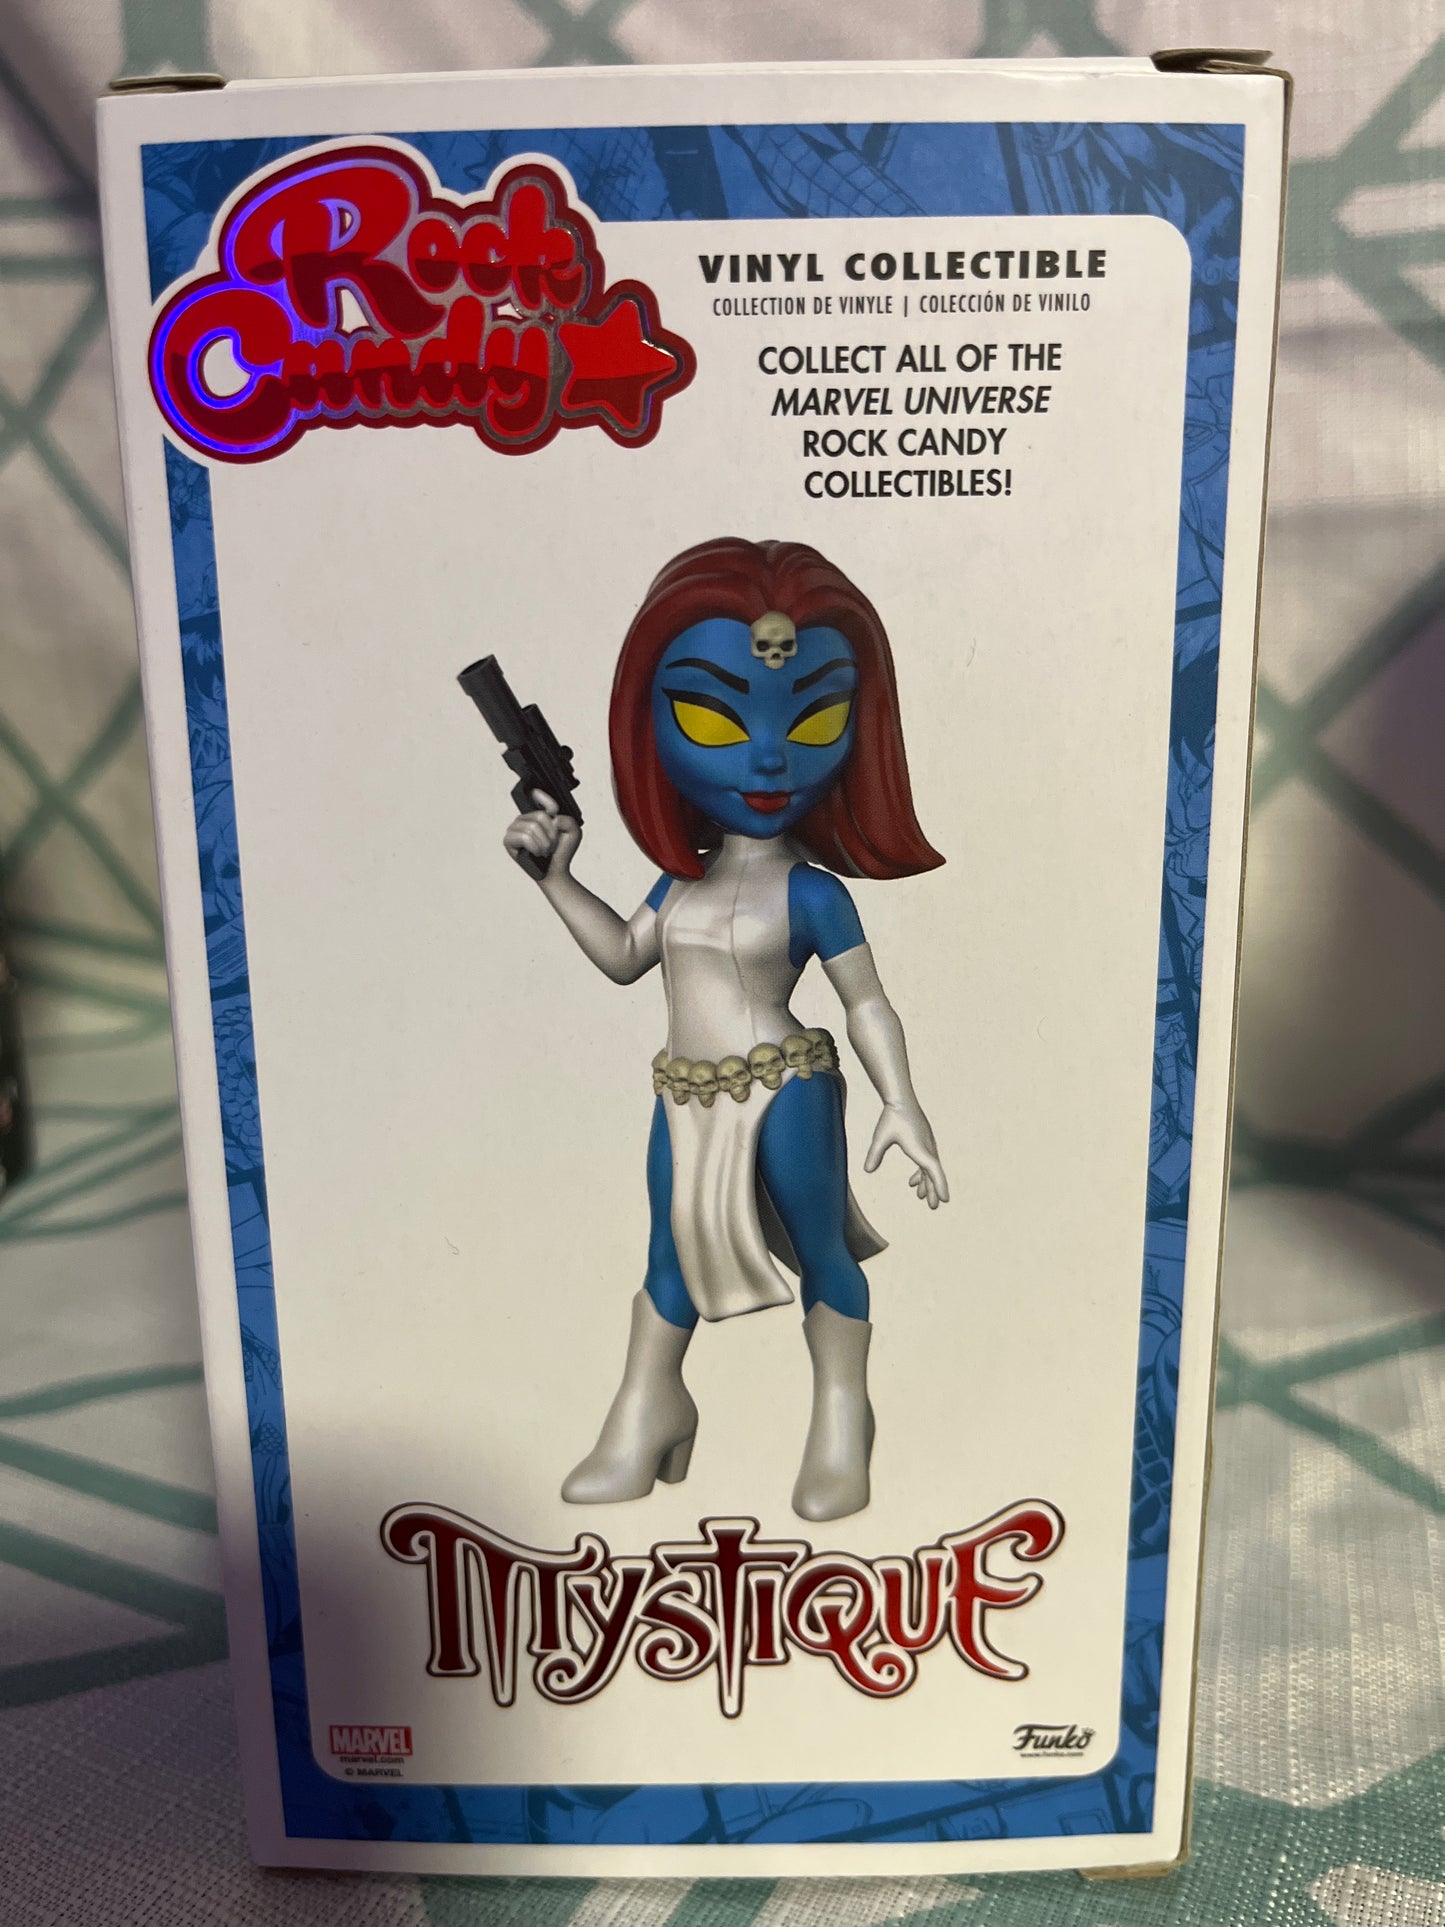 MARVEL COLLECTOR CORPS MYSTIQUE